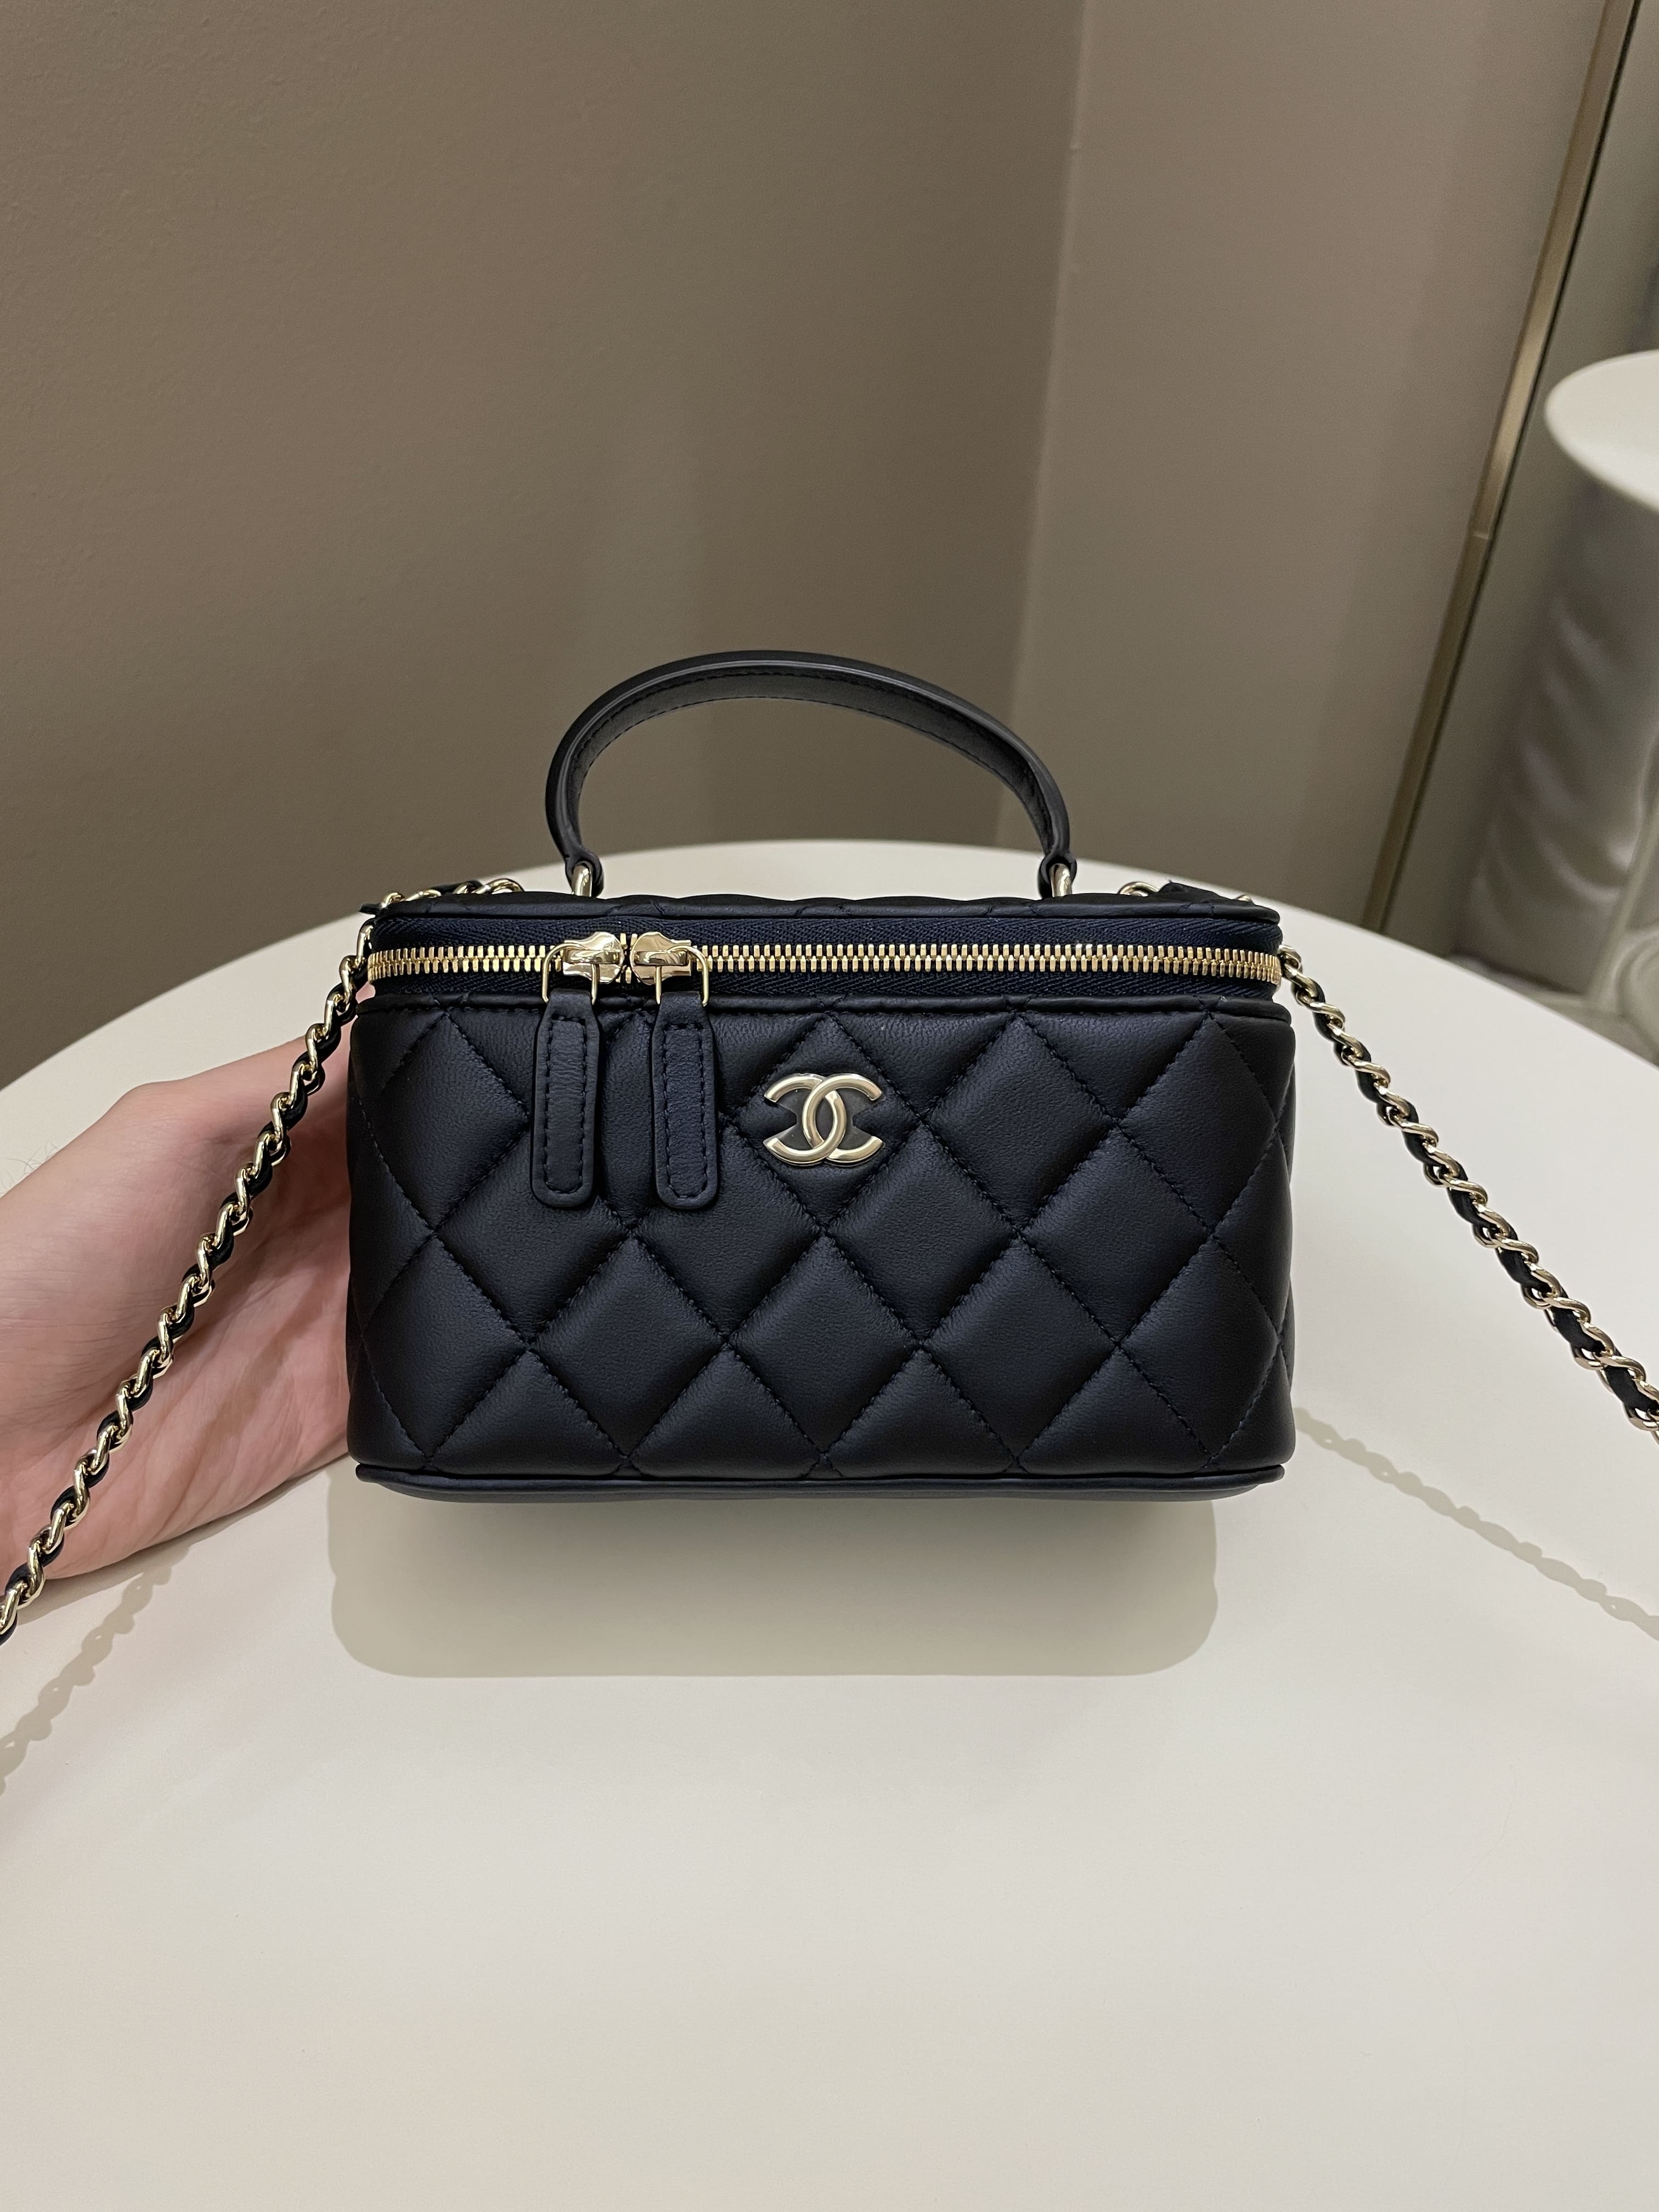 The Iconic Chanel Vanity Bag is Our New Obsession! 